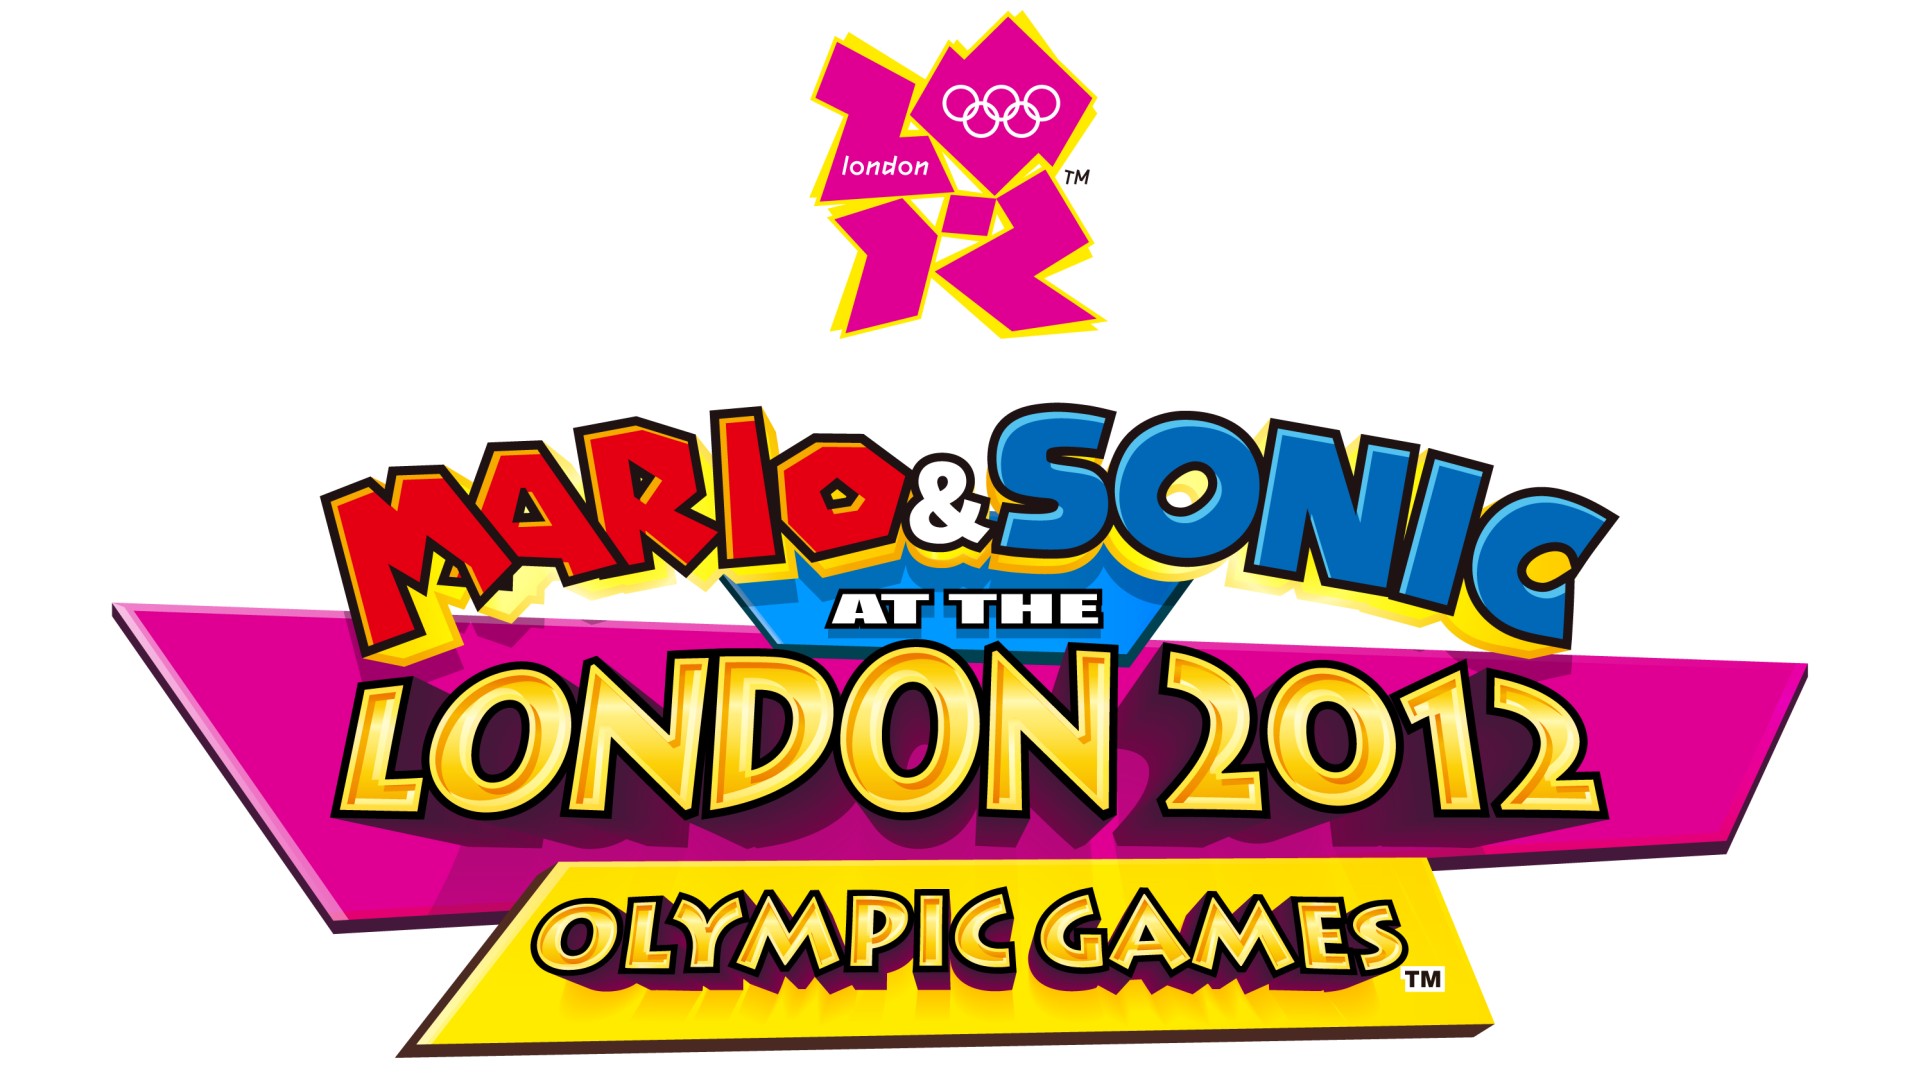 Video Game Mario Amp Sonic At The London 2012 Olympic Games 1920x1080